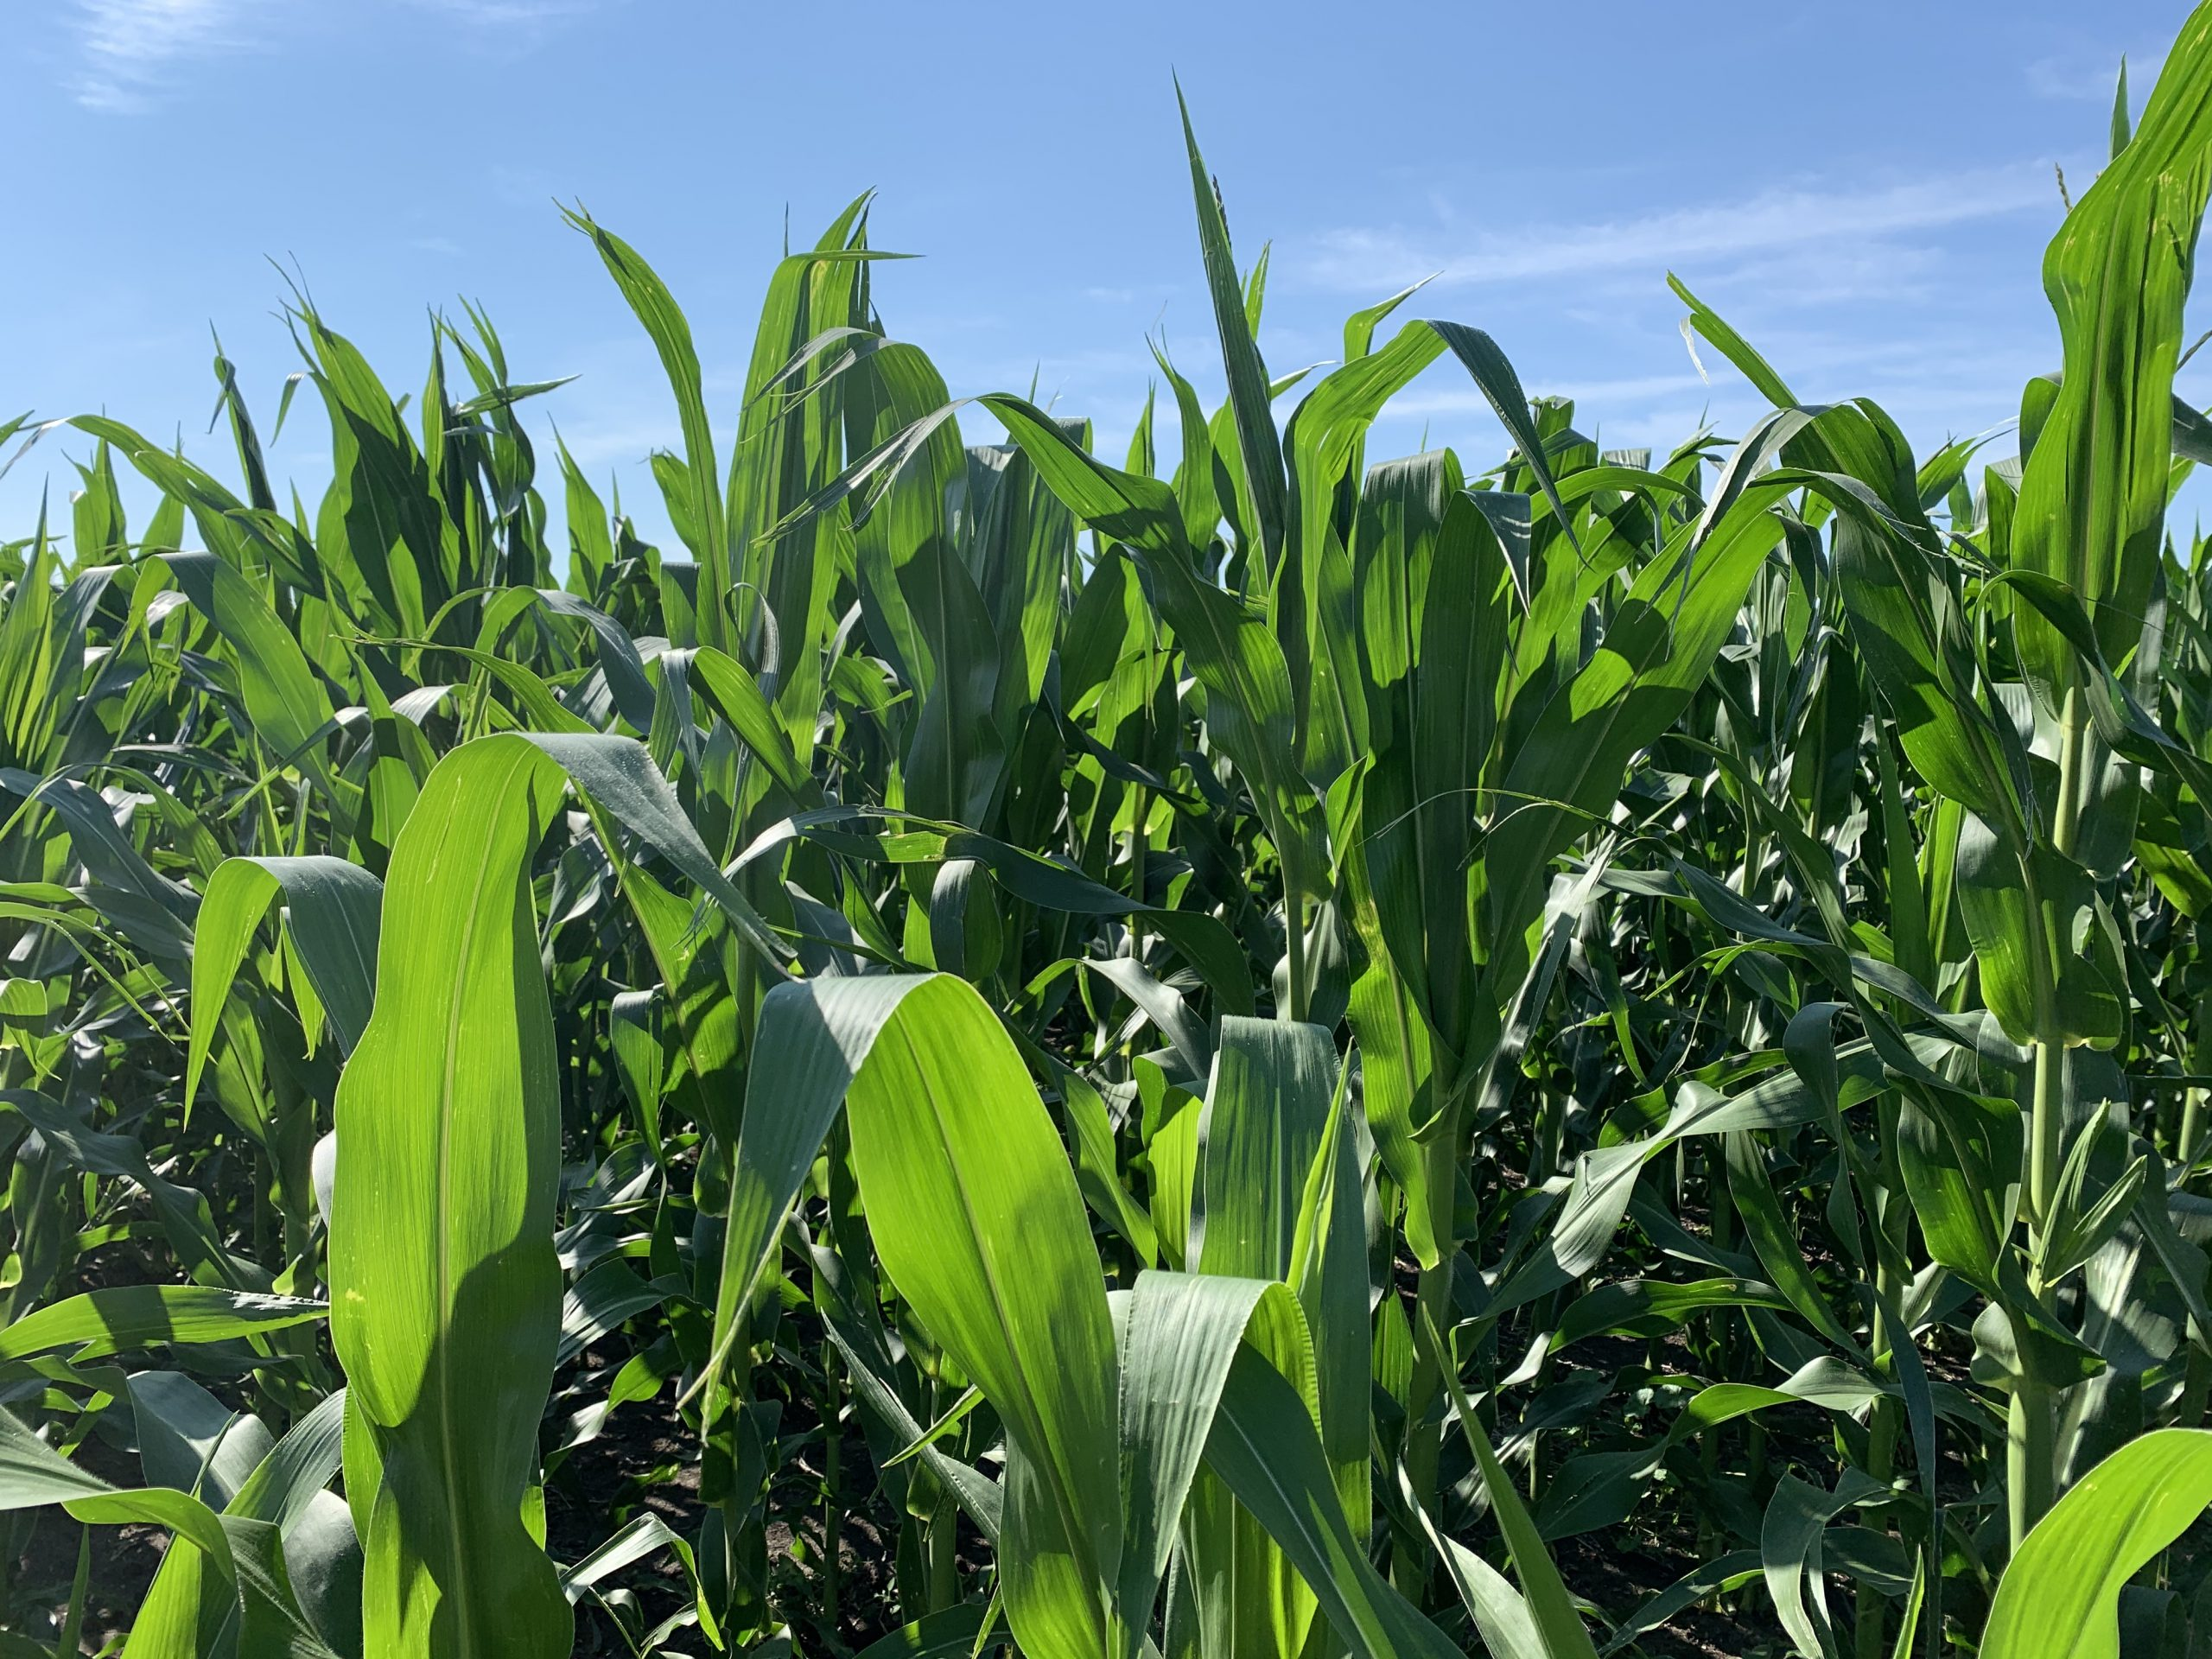 Mid-morning Ag News, Feb 21, 2022: Crop Weather Concerns in South America